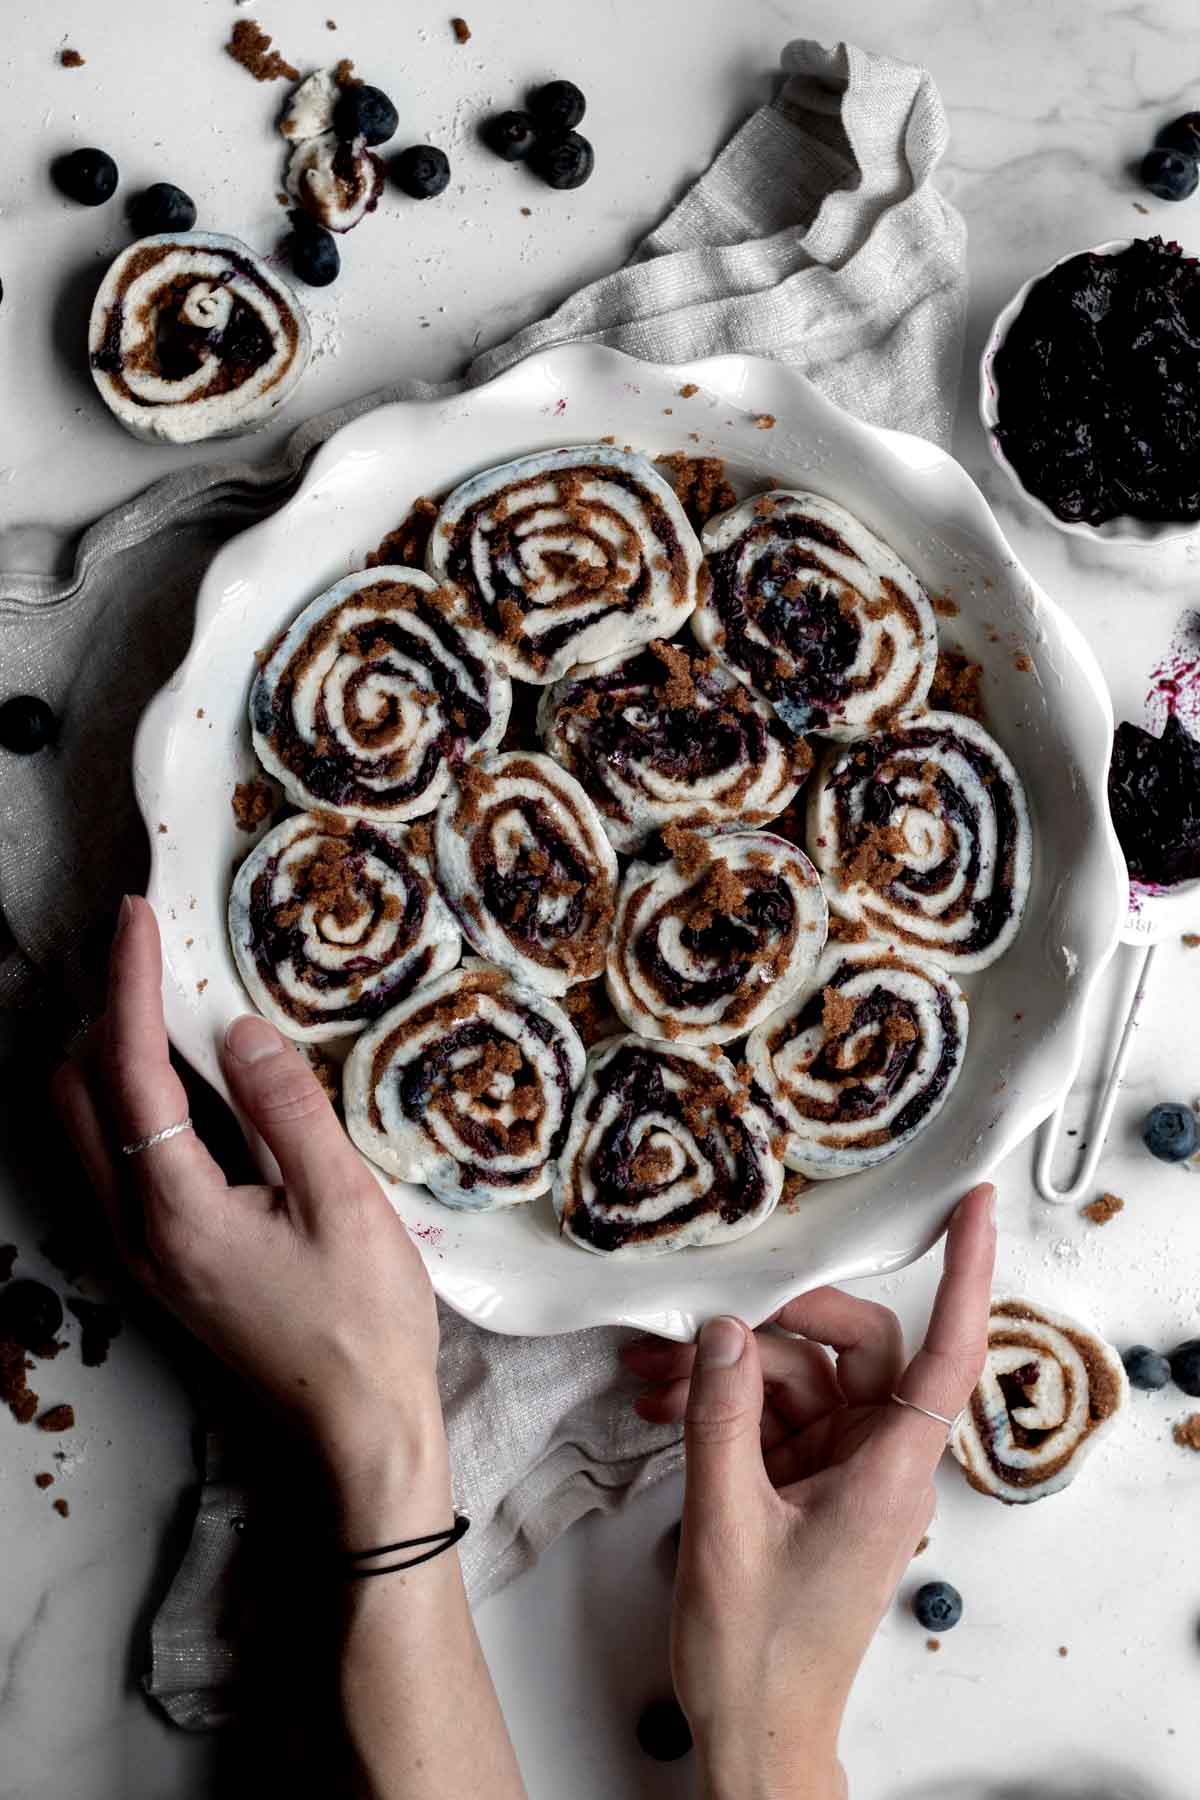 Spirals of unglazed Blueberry Cinnamon Rolls packed into a baking dish.